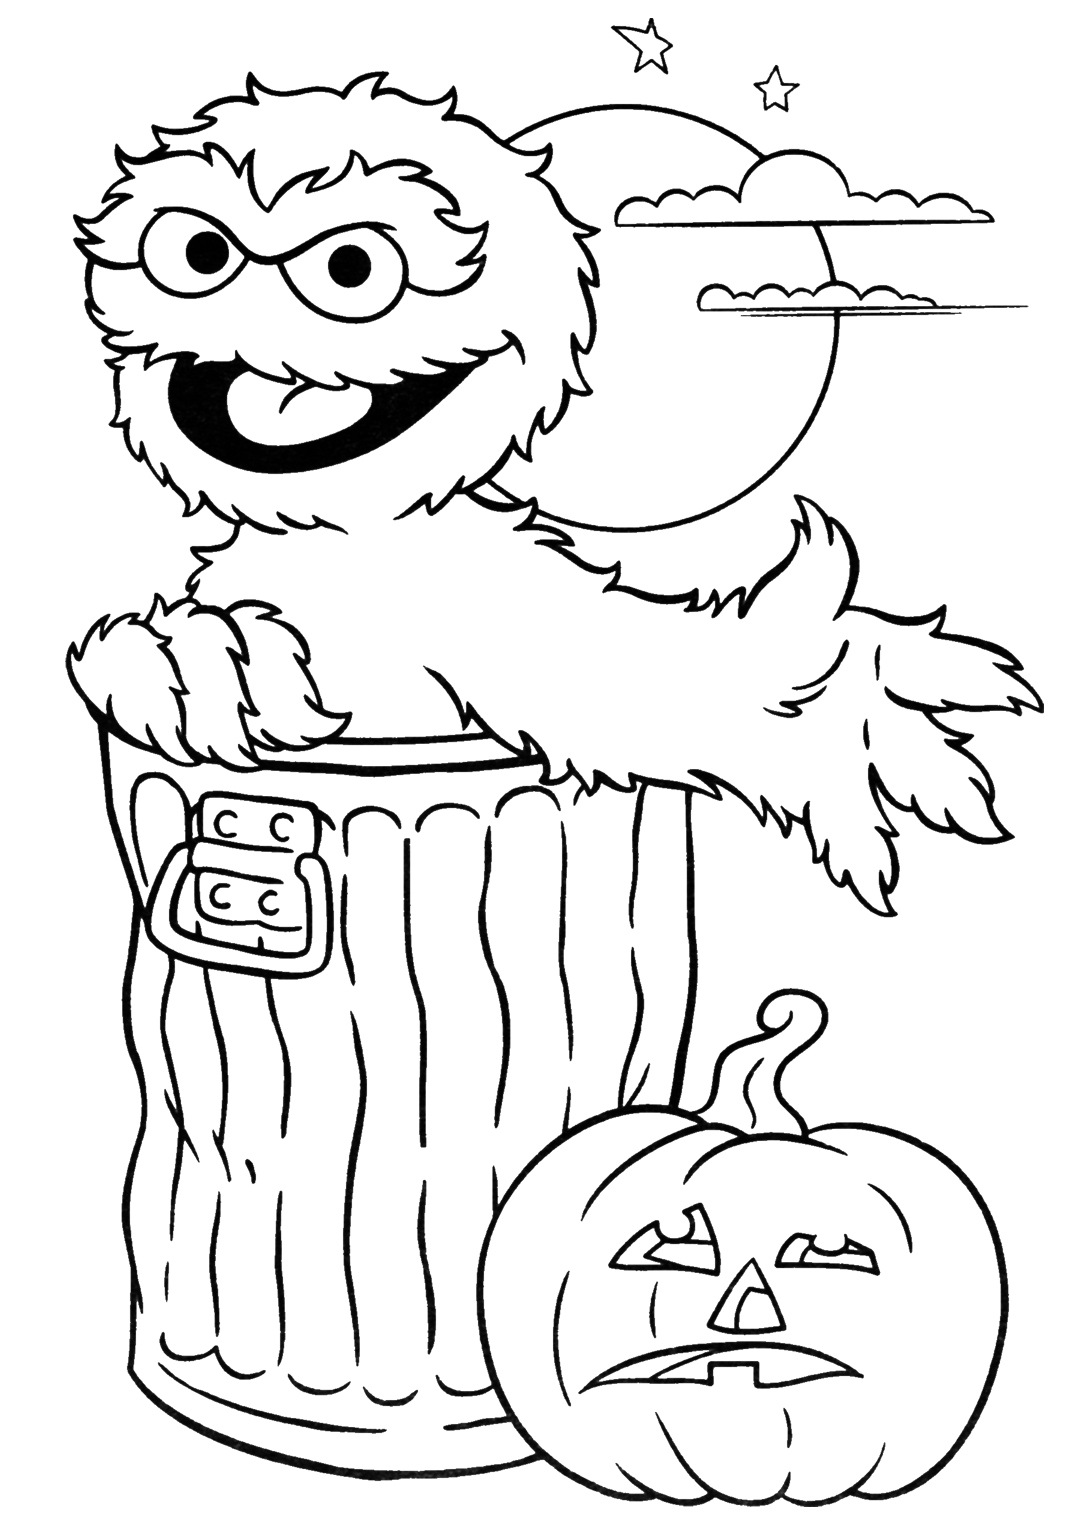  Halloween Coloring Pictures To Print For Free 6